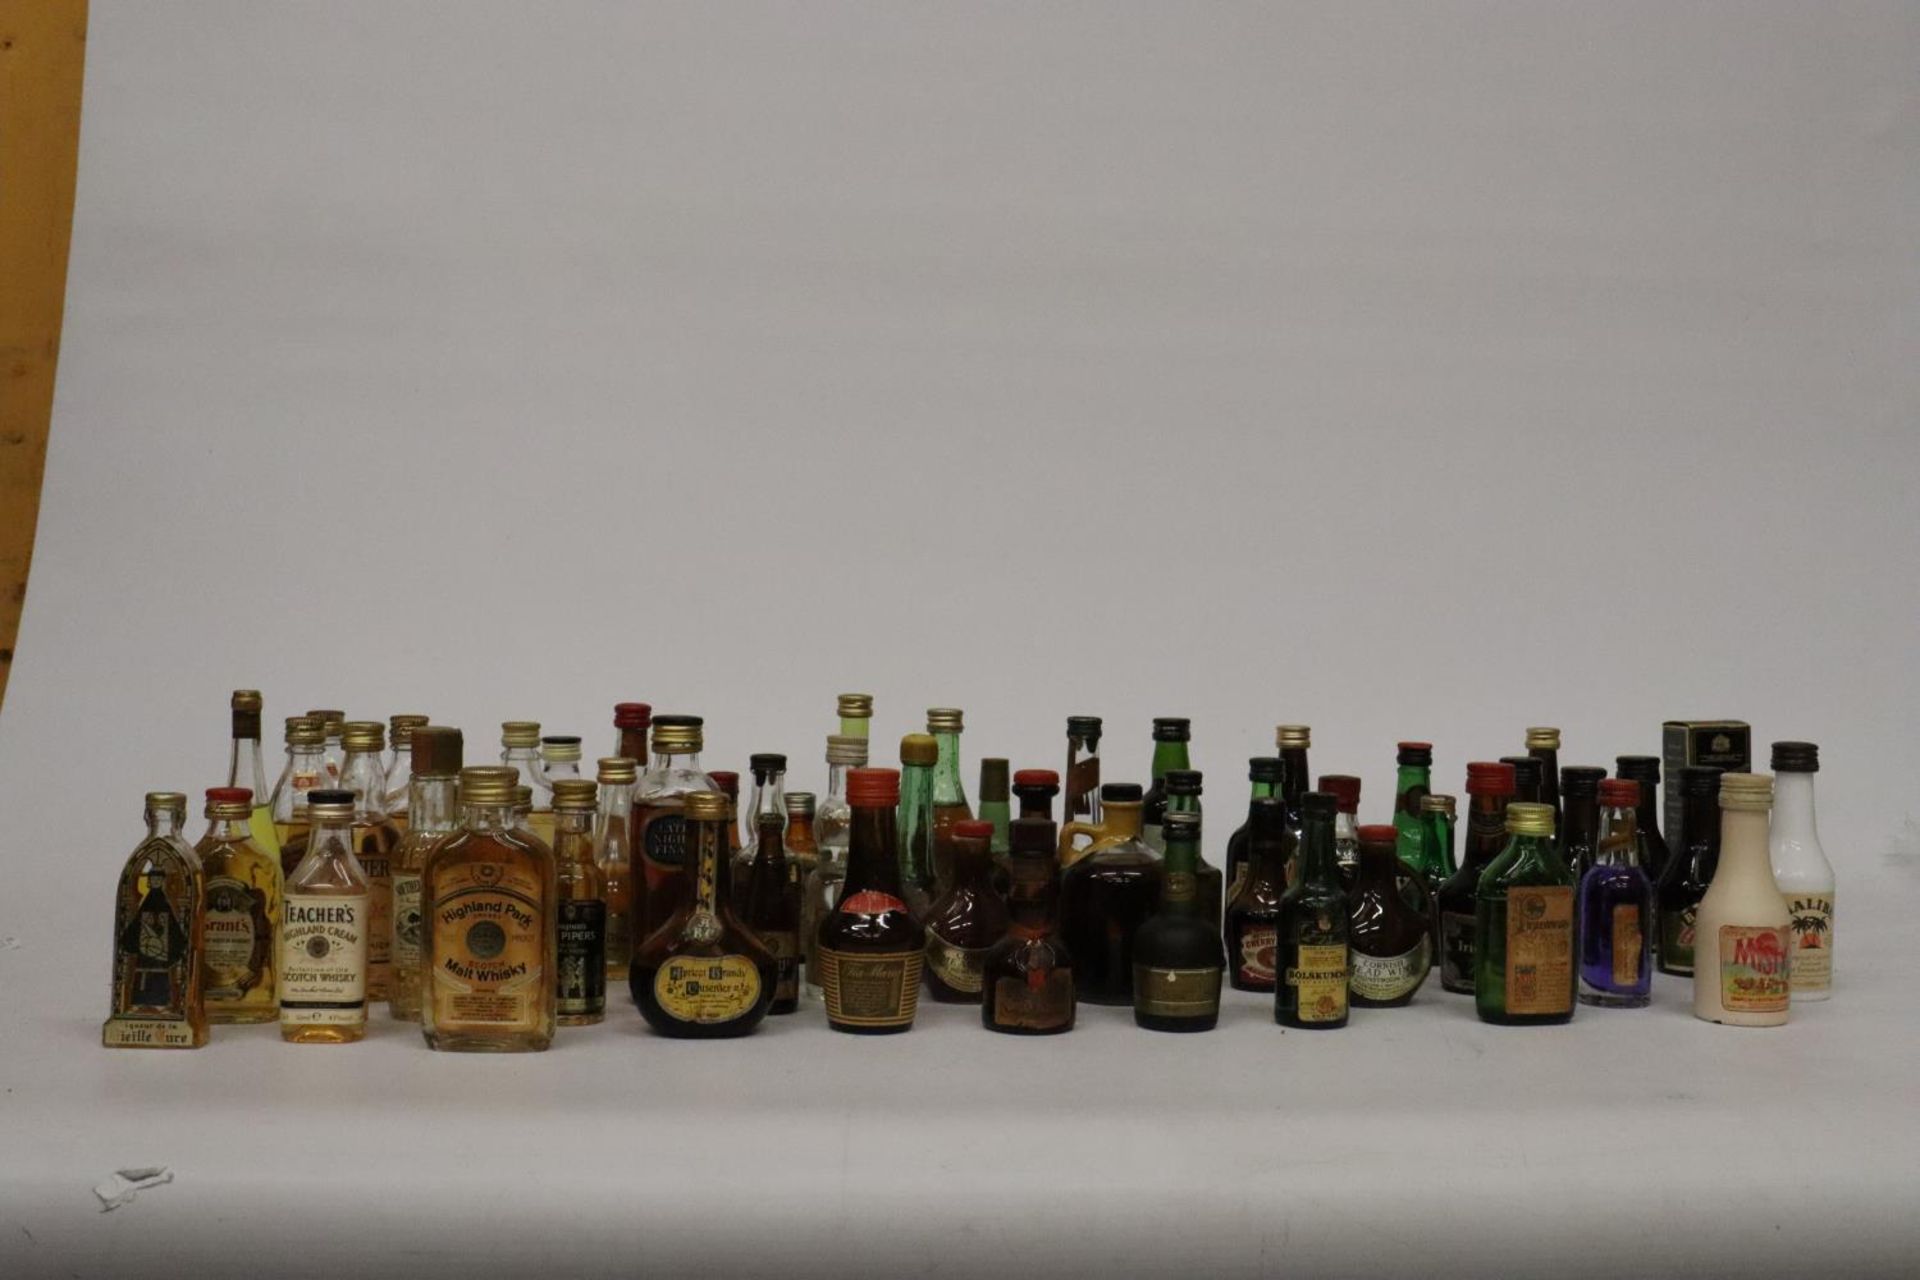 A LARGE QUANTITY OF MINIATURE BOTTLES OF ALCOHOL - Image 2 of 10